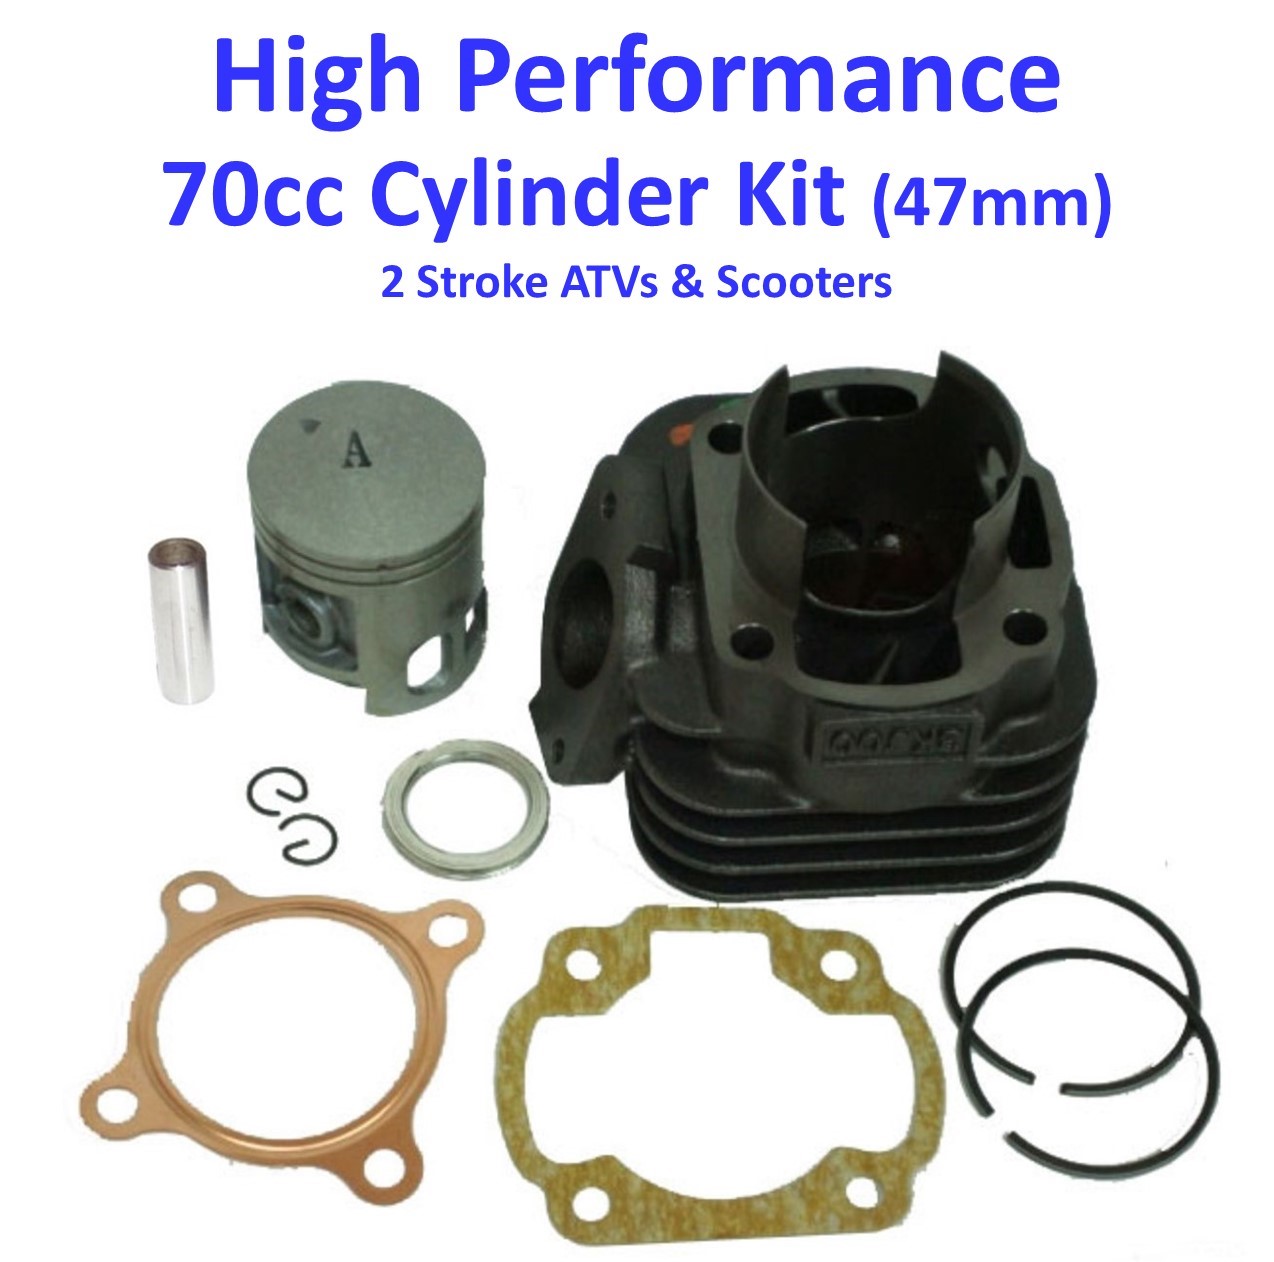 Cylinder Head 47mm E-Ton Viper RXL70cc Fits Most 2 Stroke ATVs and Scooters - Click Image to Close